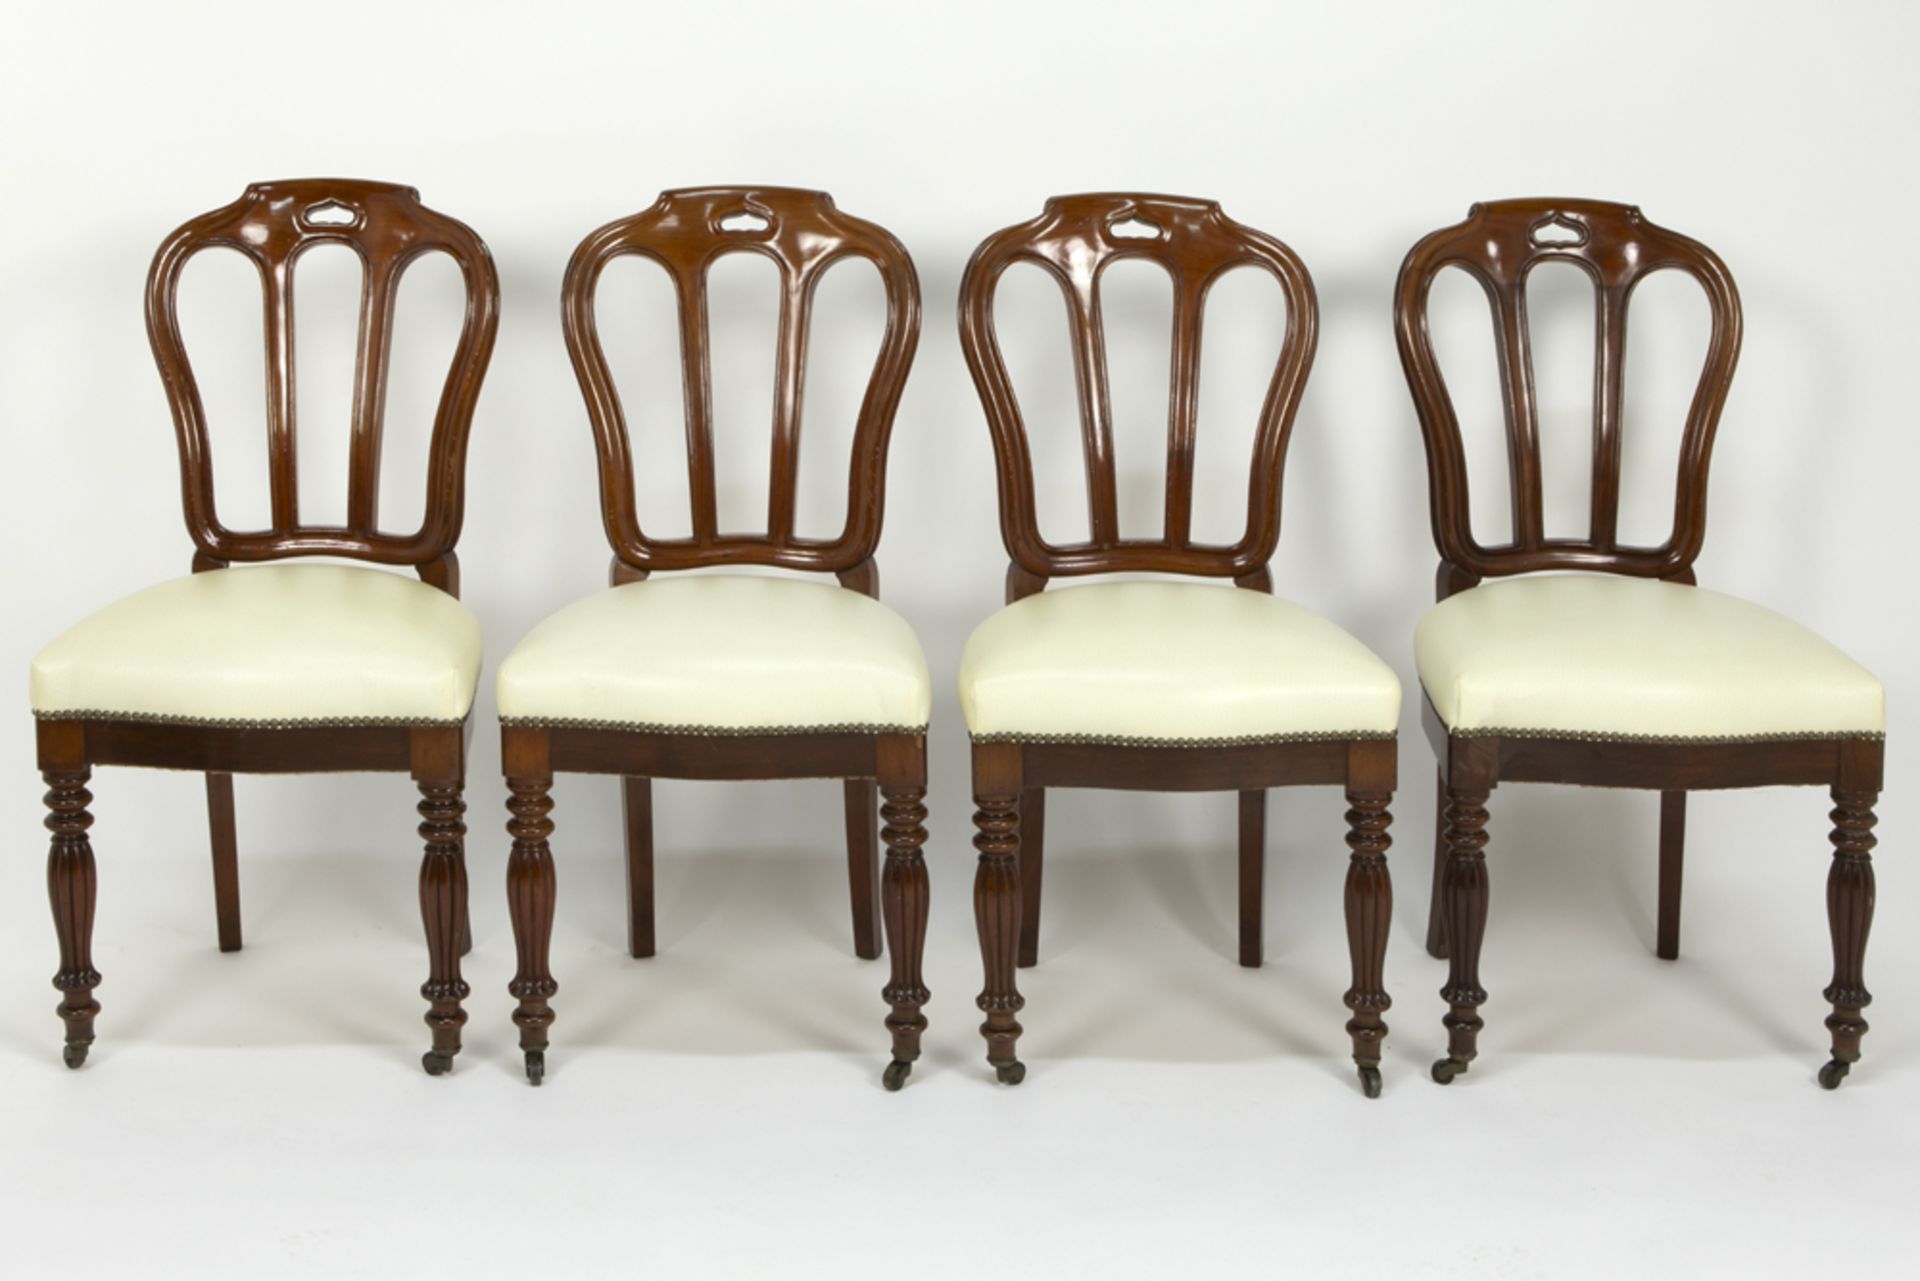 rare series of sixteen 19th Cent. chairs with an elegant design in mahogany - all completely - Image 6 of 6